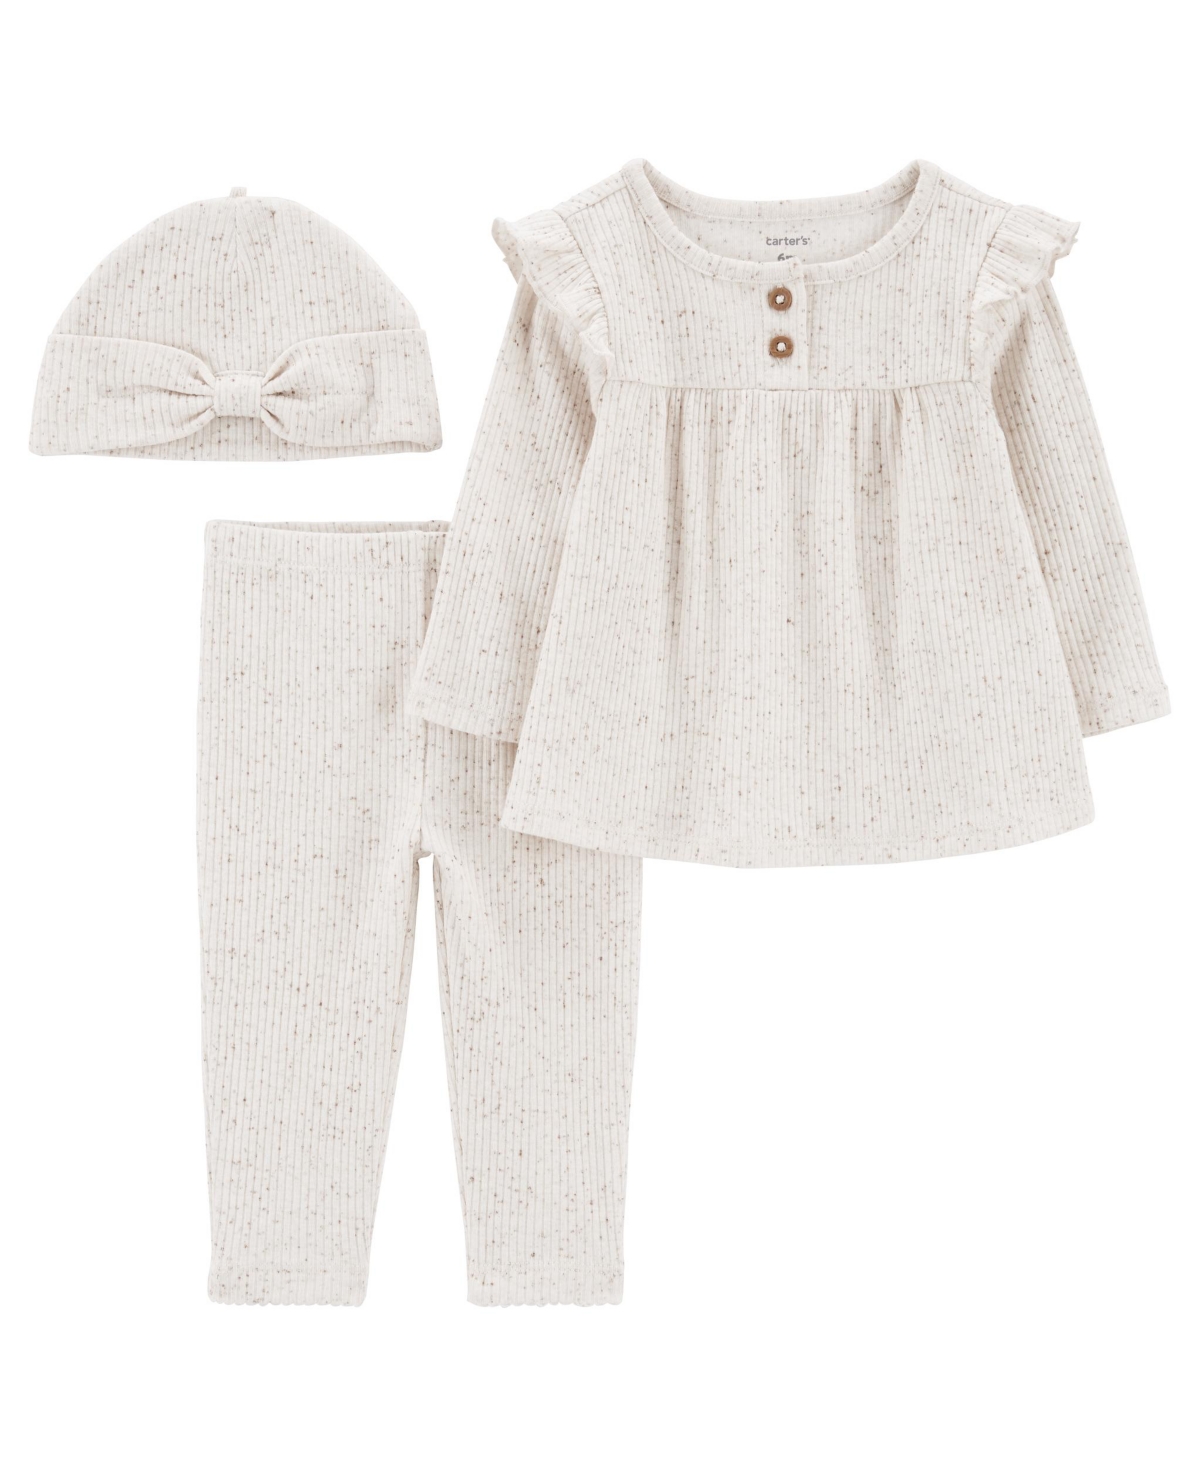 Carter's Baby Girls Take Me Home Top, Pants And Beanie, 3 Piece Set In White